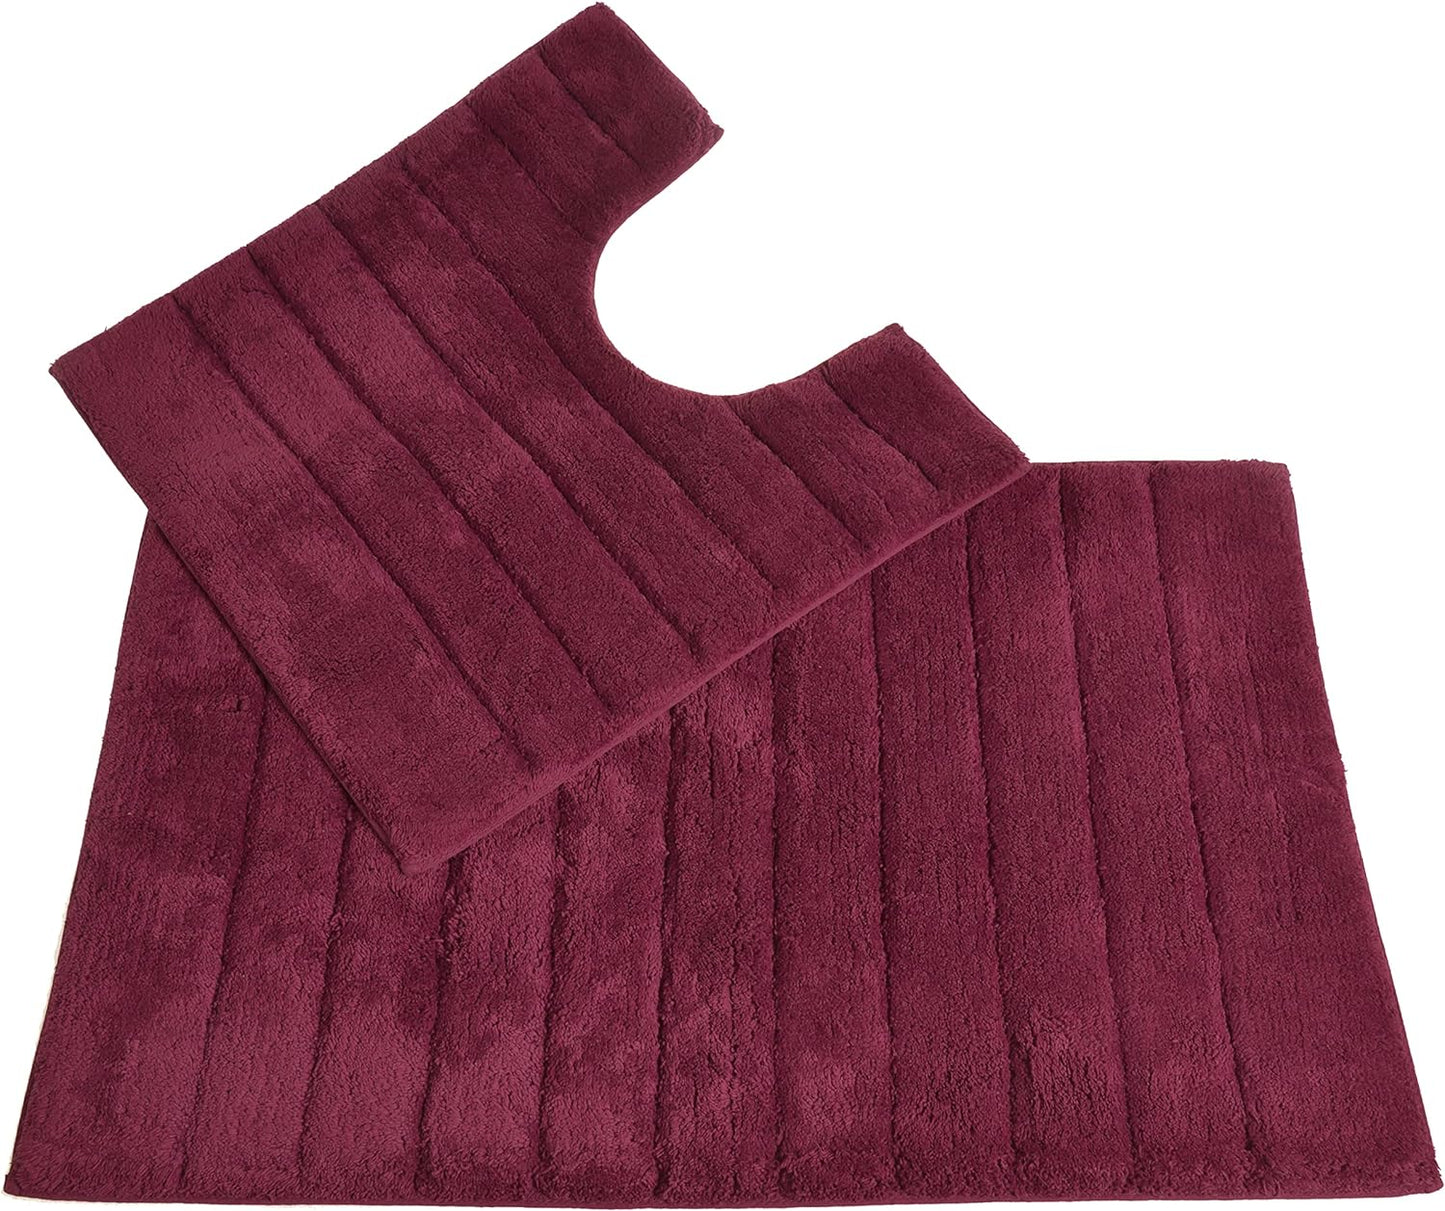 100% Cotton Two Piece Linear Rib Bath and Pedestal Mat in Beetroot